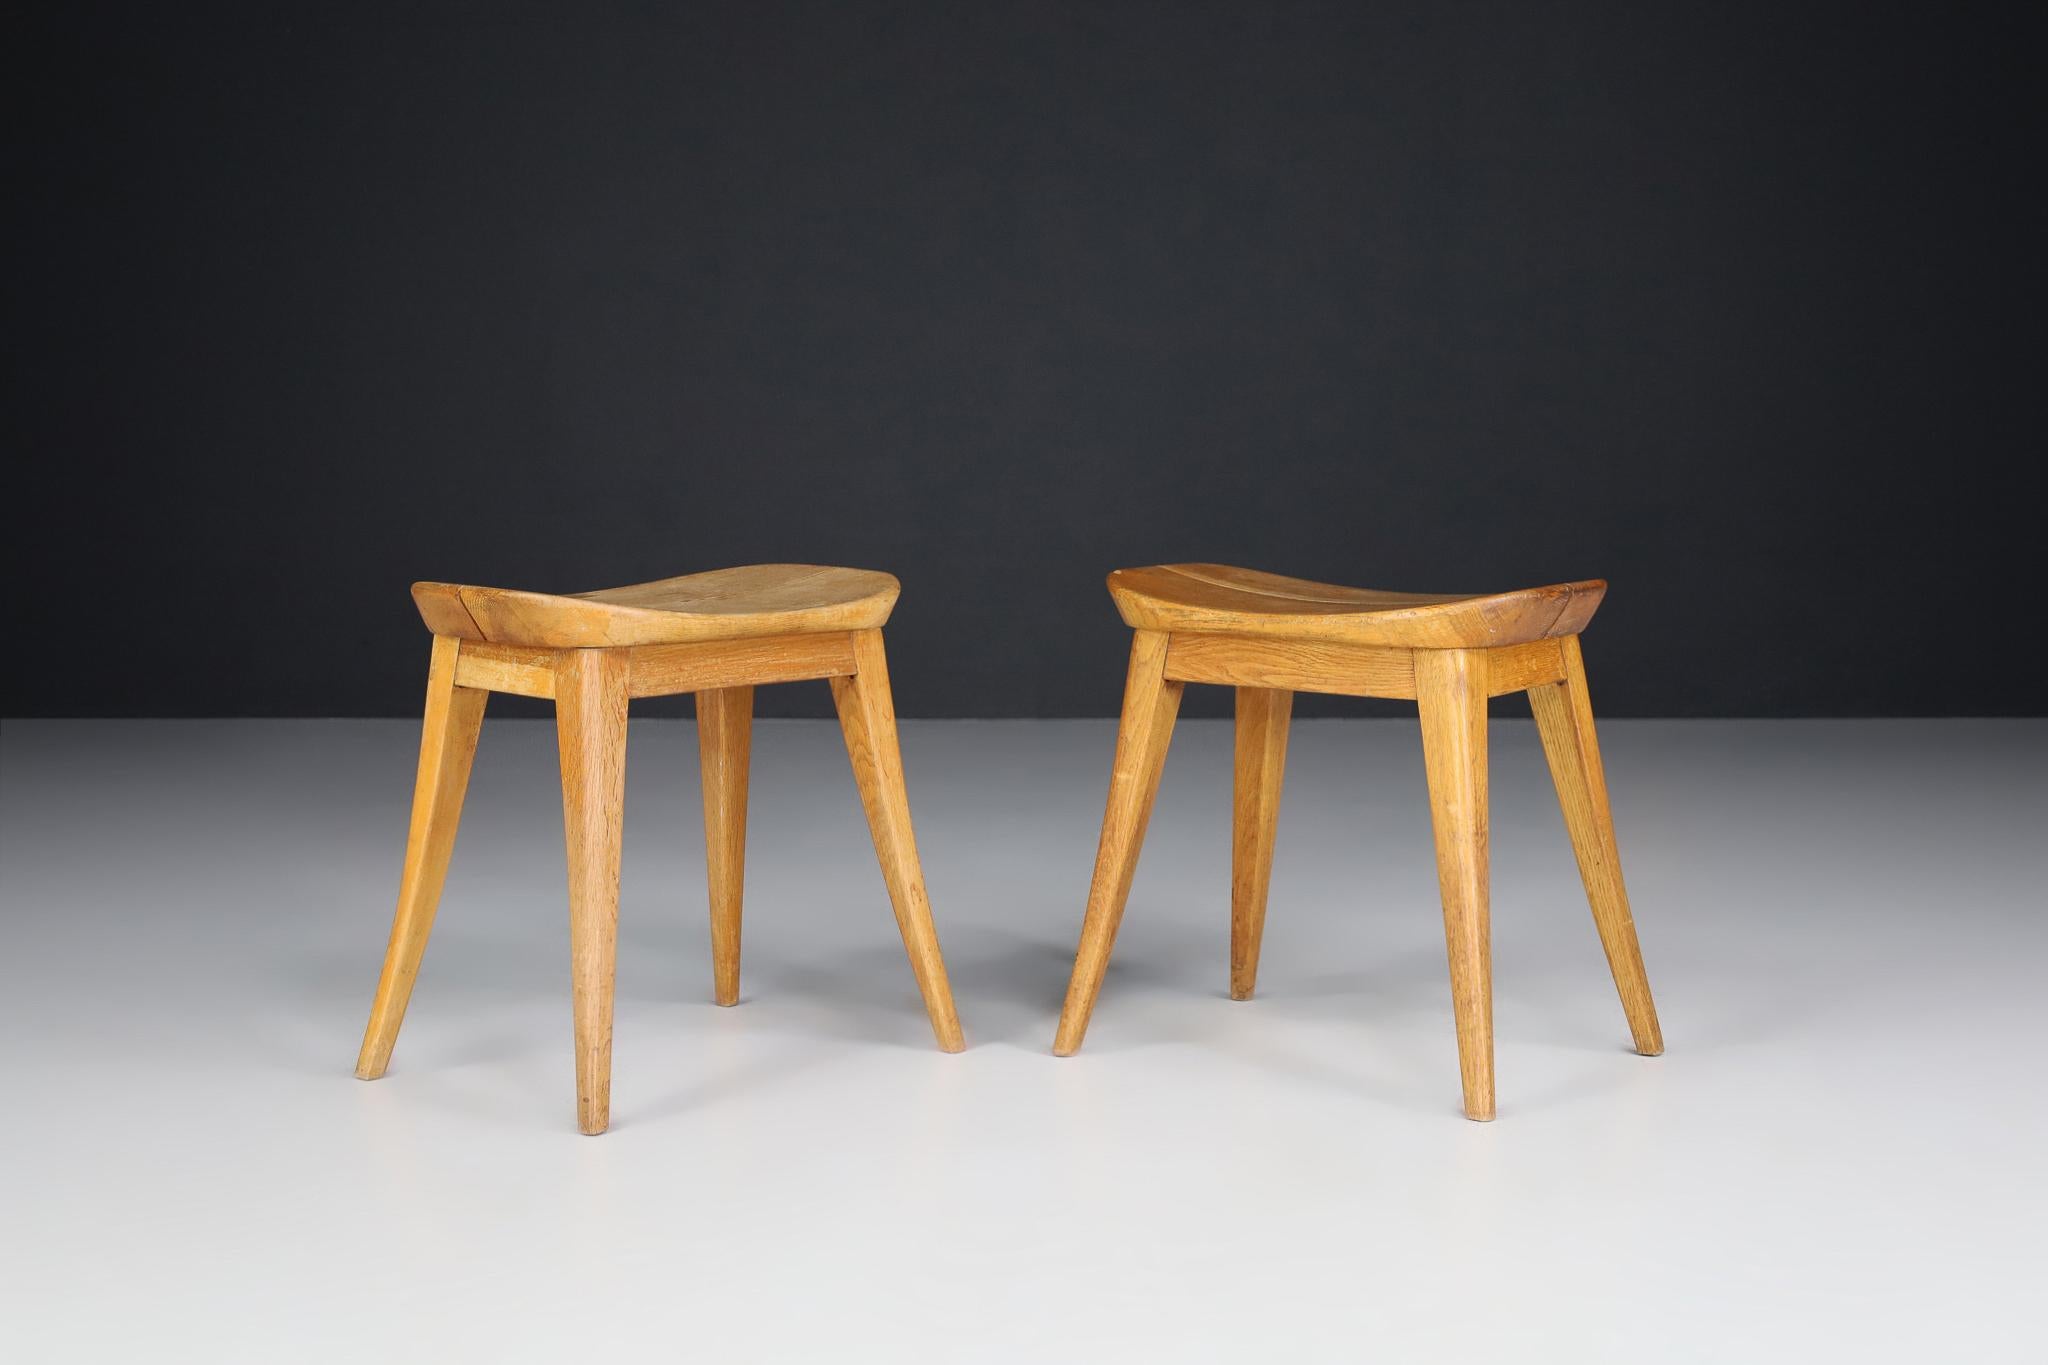 Pair oak coffee bean stools in oak, France 1950s

Pair French stools in the style of Charlotte Perriand , Pierre Gautier-Delaye and Pierre Chapo , France 1950s . Elegant and refined pair stools made in solid oak. Characteristic for the stools are